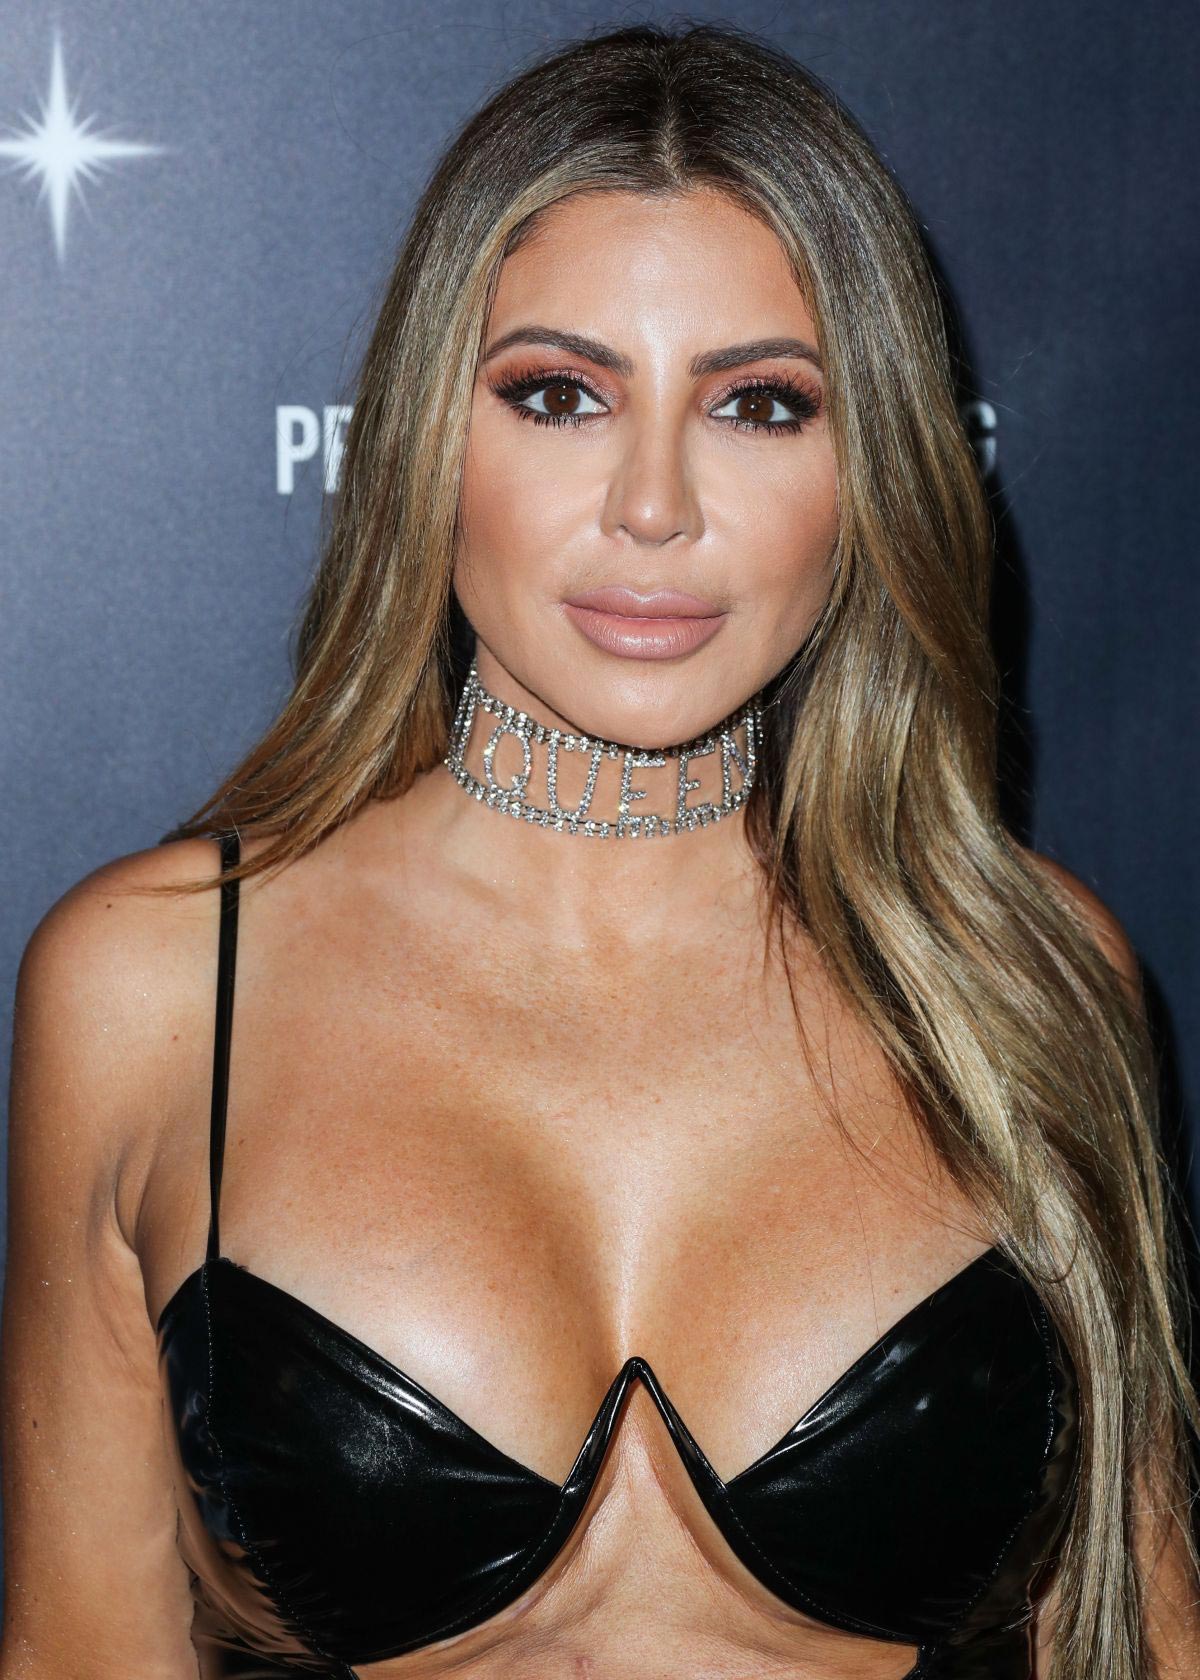 Larsa Pippen at Prettylittlething Starring Hailey Baldwin Event in Los Angeles 2018/11/05